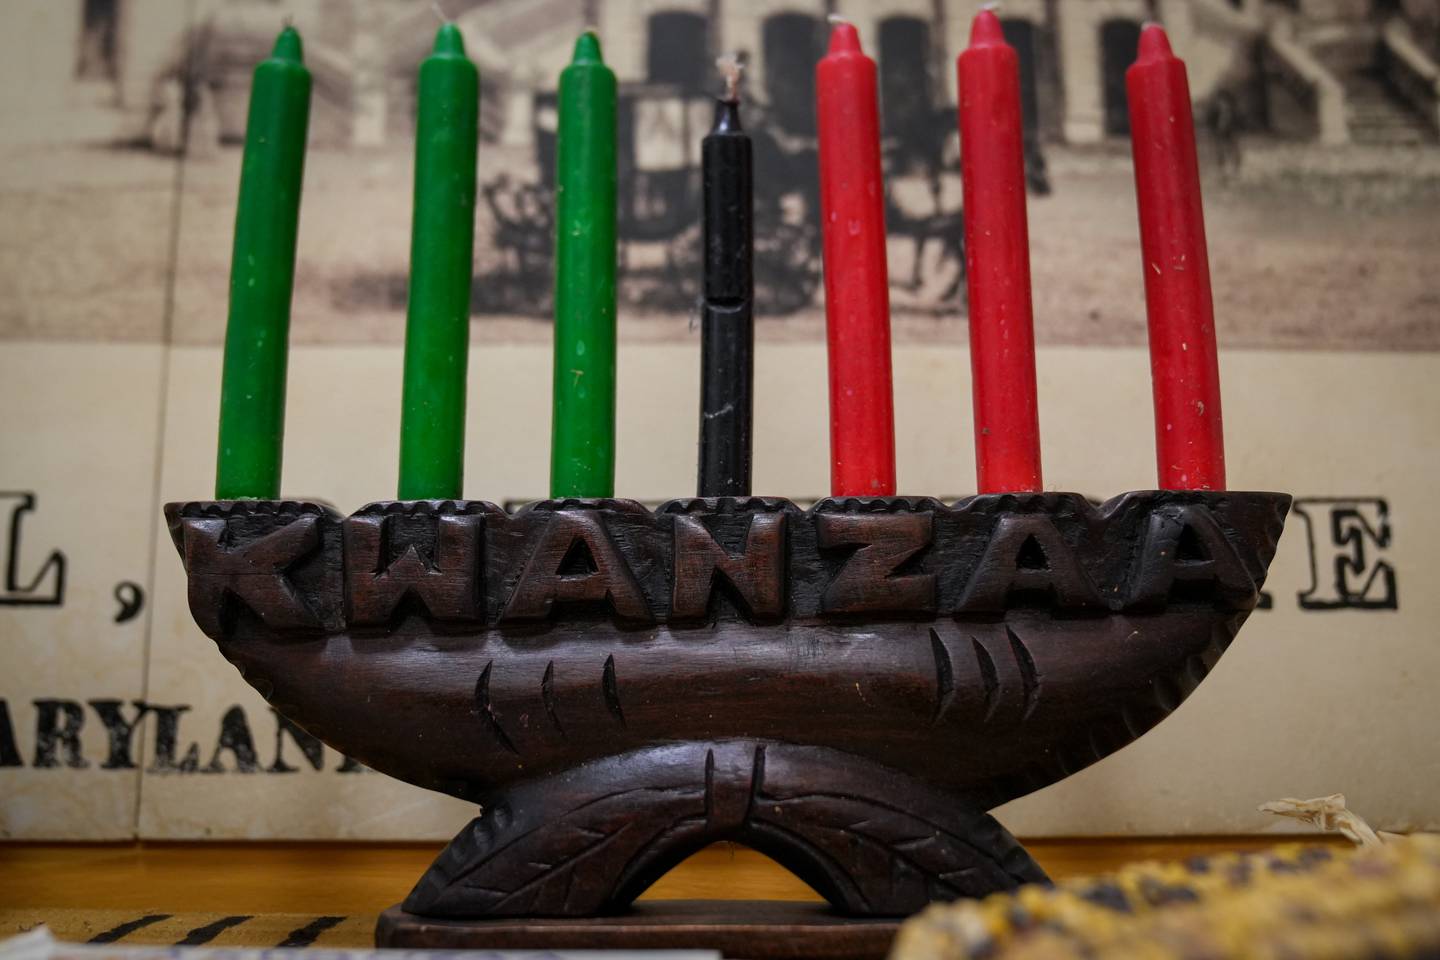 A kinara holds seven candles for Kwanzaa celebrations in a display inside Baltimore's City Hall.